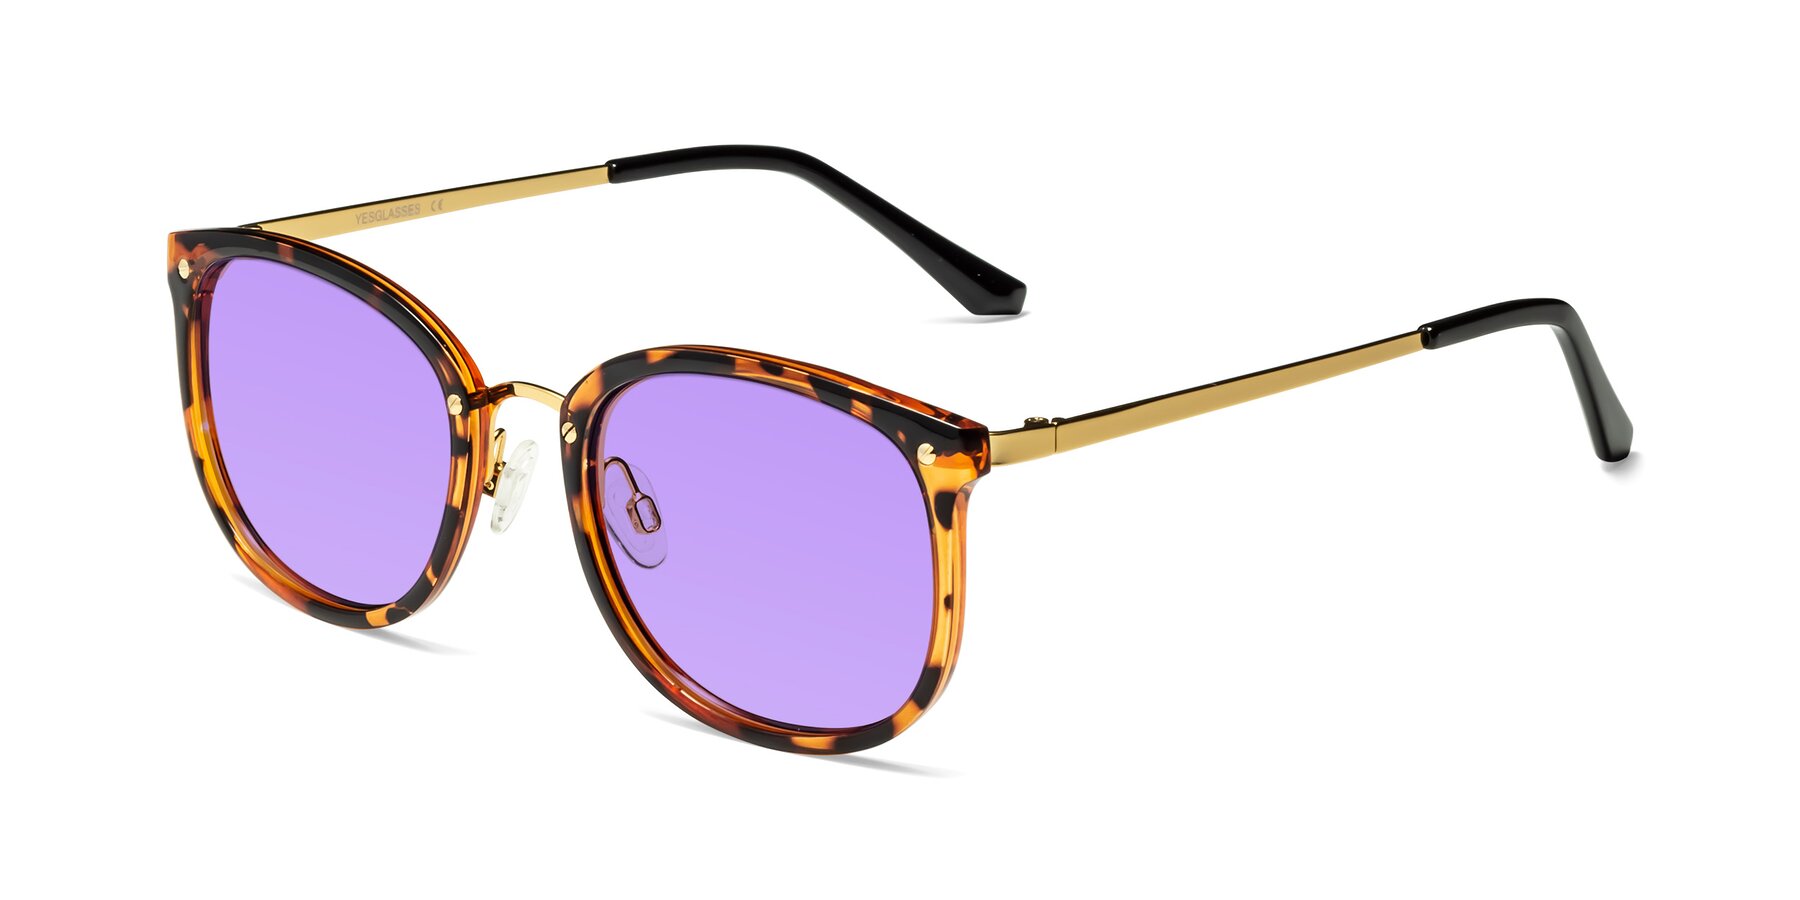 Angle of Timeless in Tortoise-Golden with Medium Purple Tinted Lenses